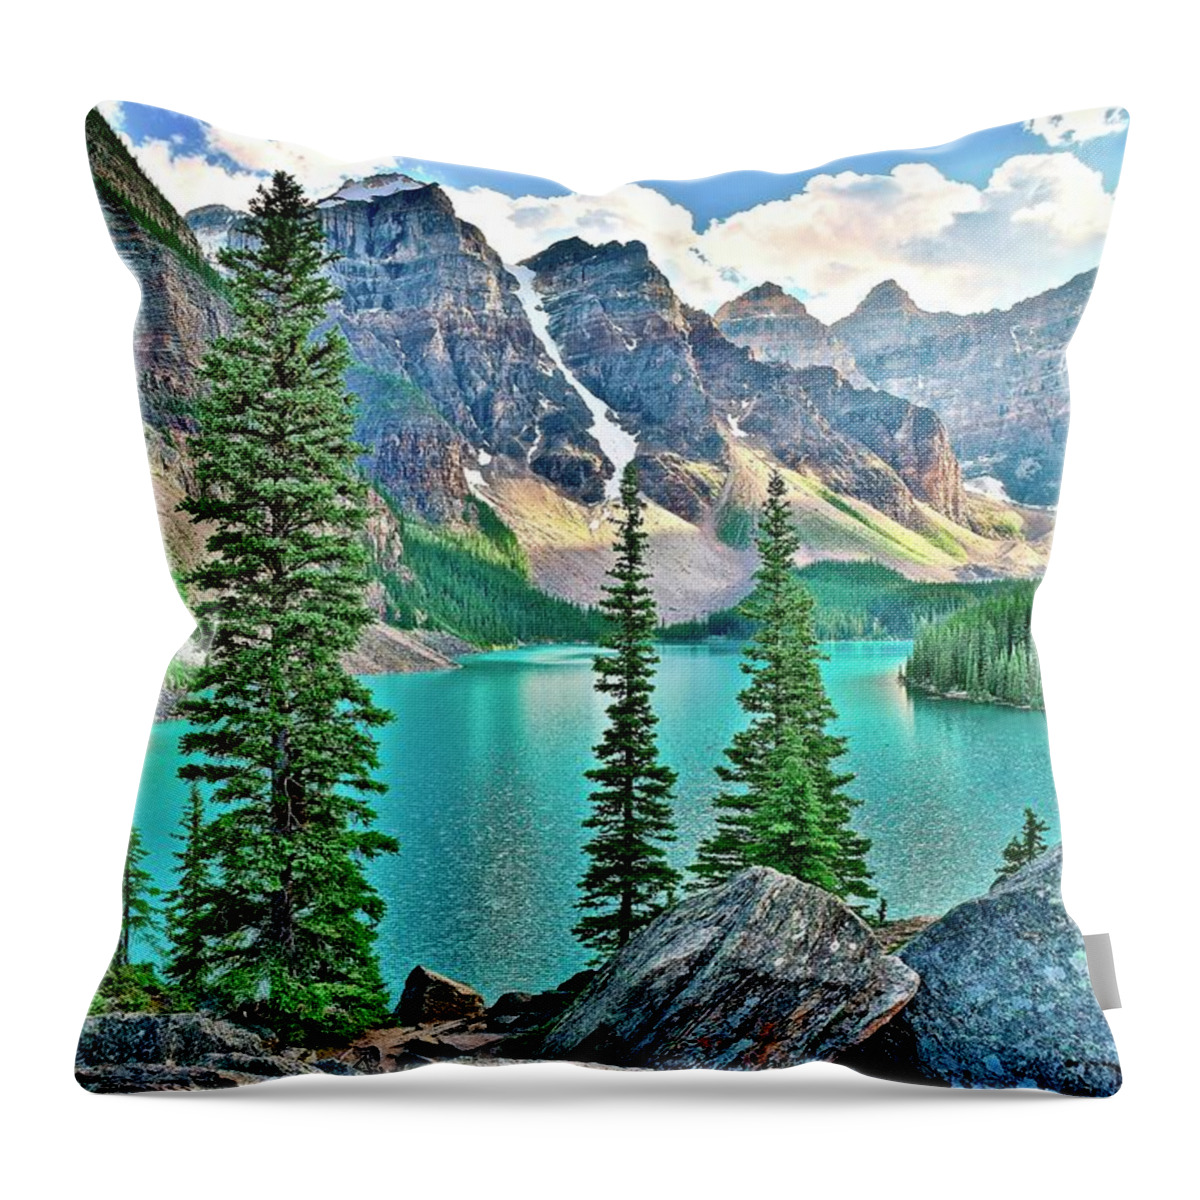 Moraine Throw Pillow featuring the photograph Iconic Banff National Park Attraction by Frozen in Time Fine Art Photography